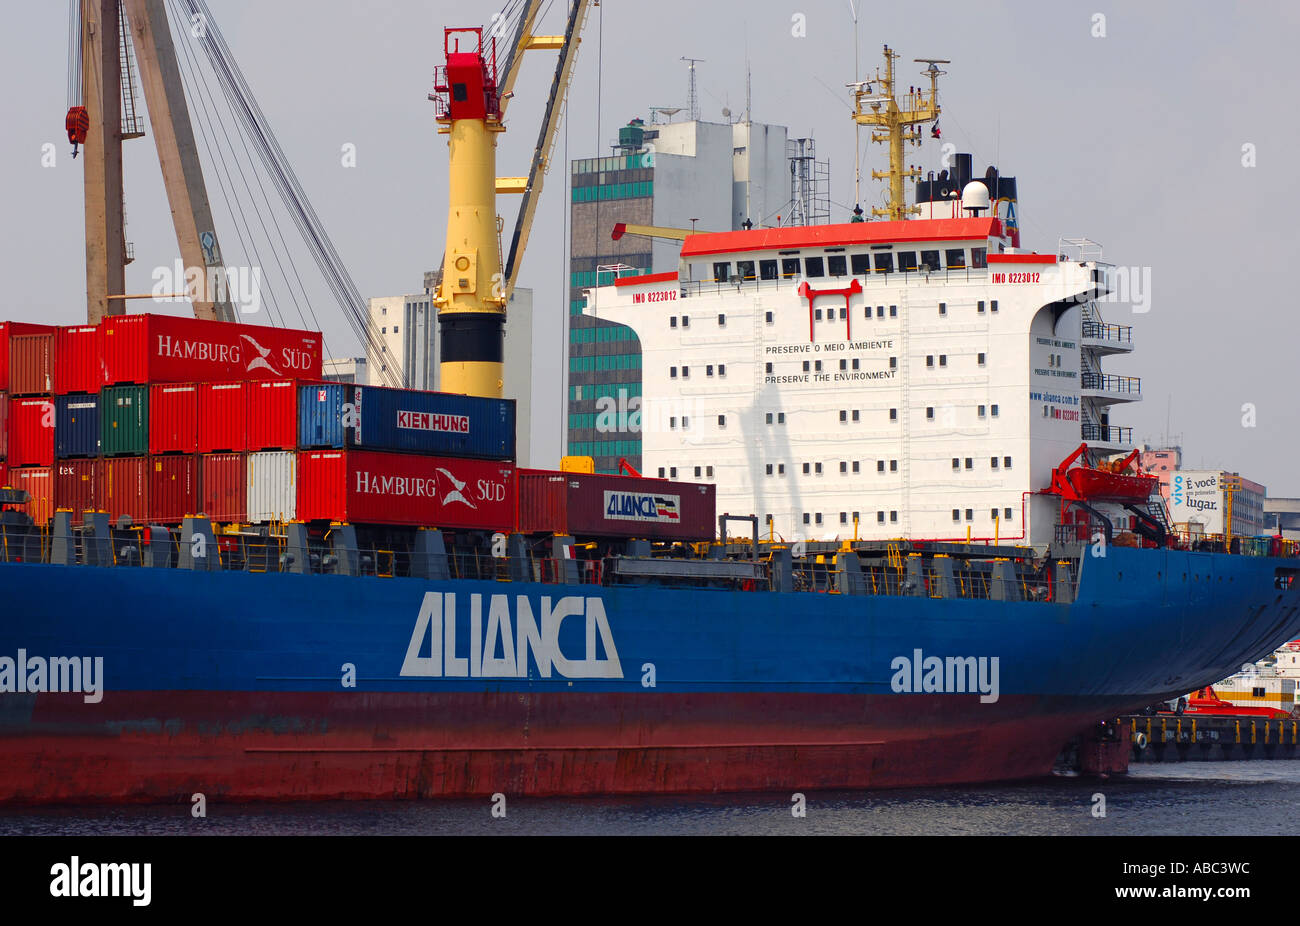 Container ship of the Alianca company (Oetker Group) in the port of Manaus Amazonas Brazil Stock Photo